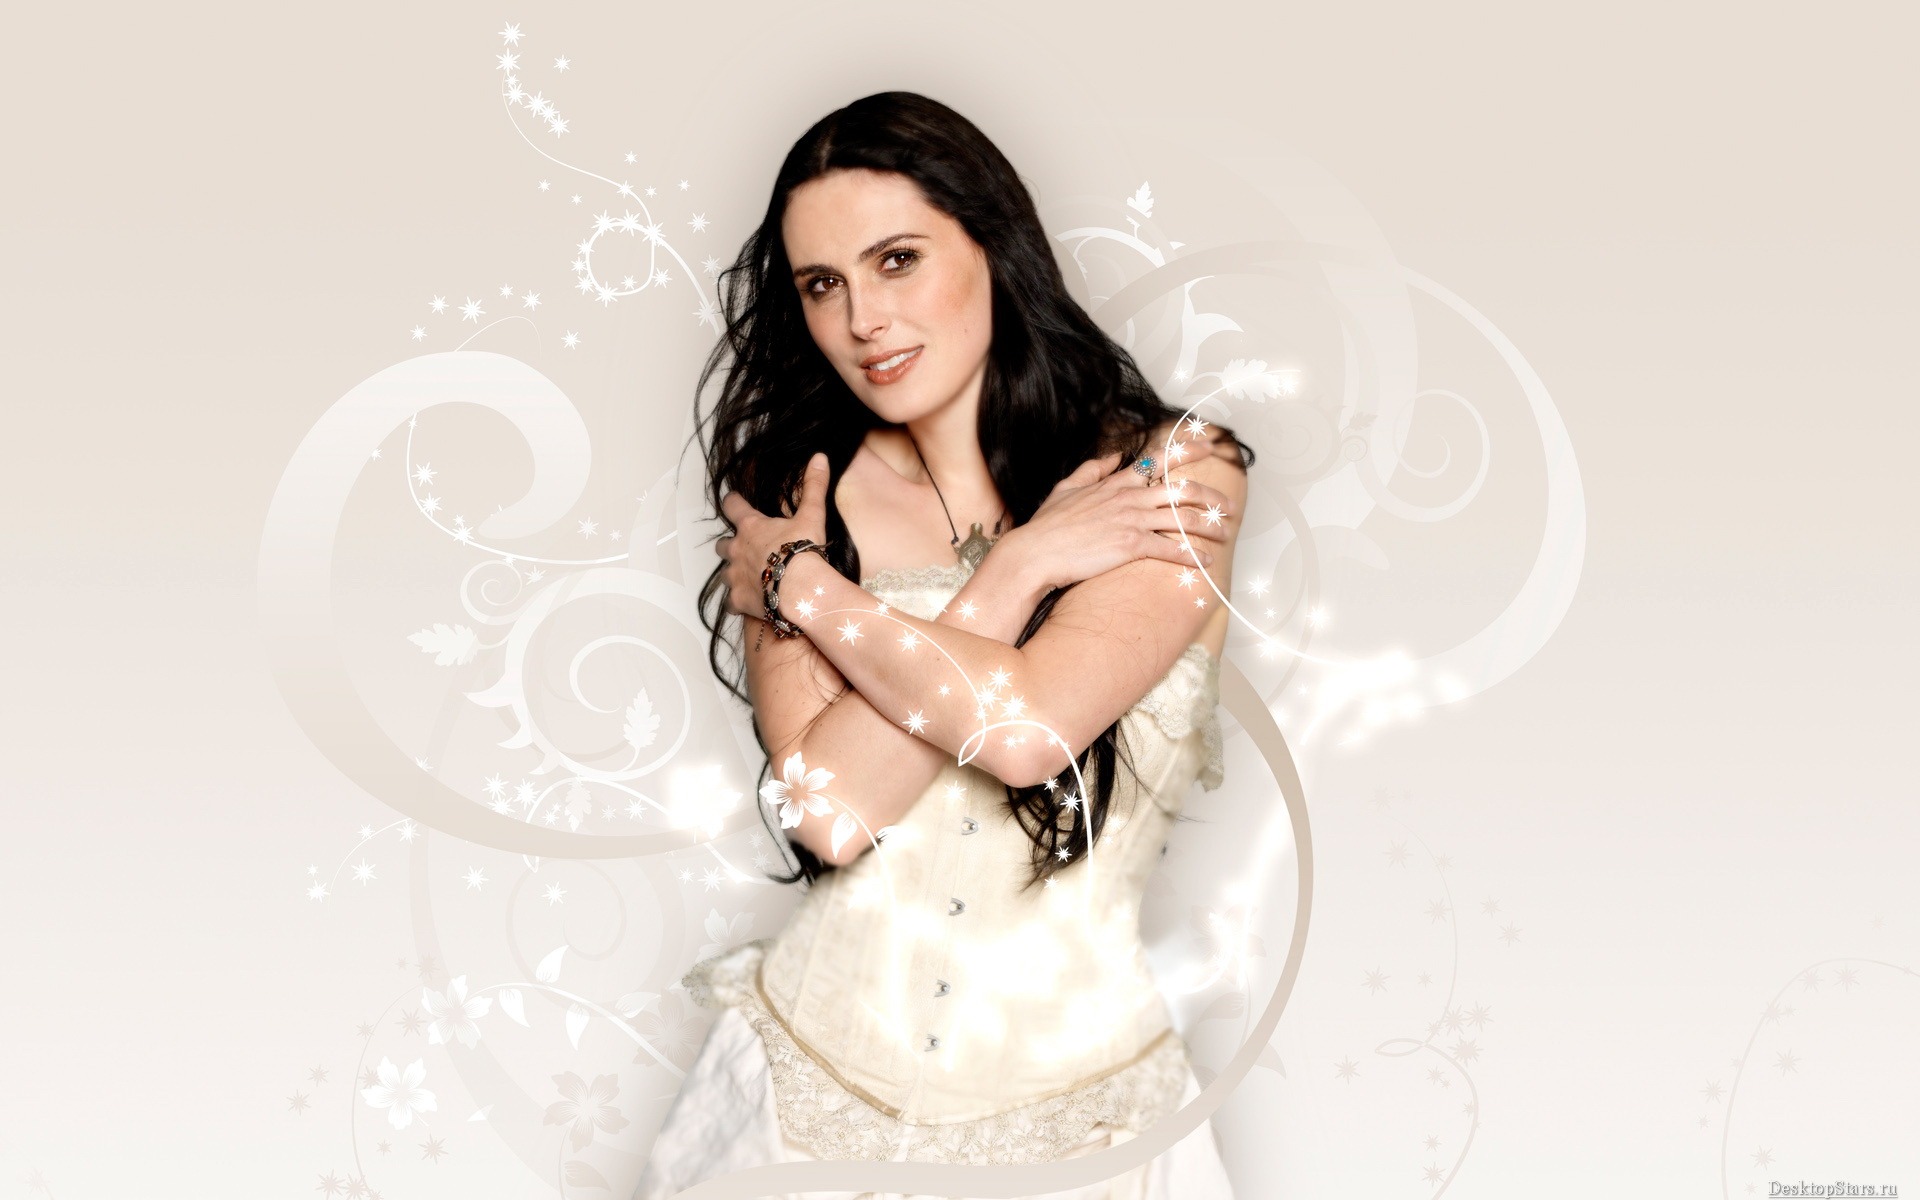 Sharon den Adel #002 - 1920x1200 Wallpapers Pictures Photos Images